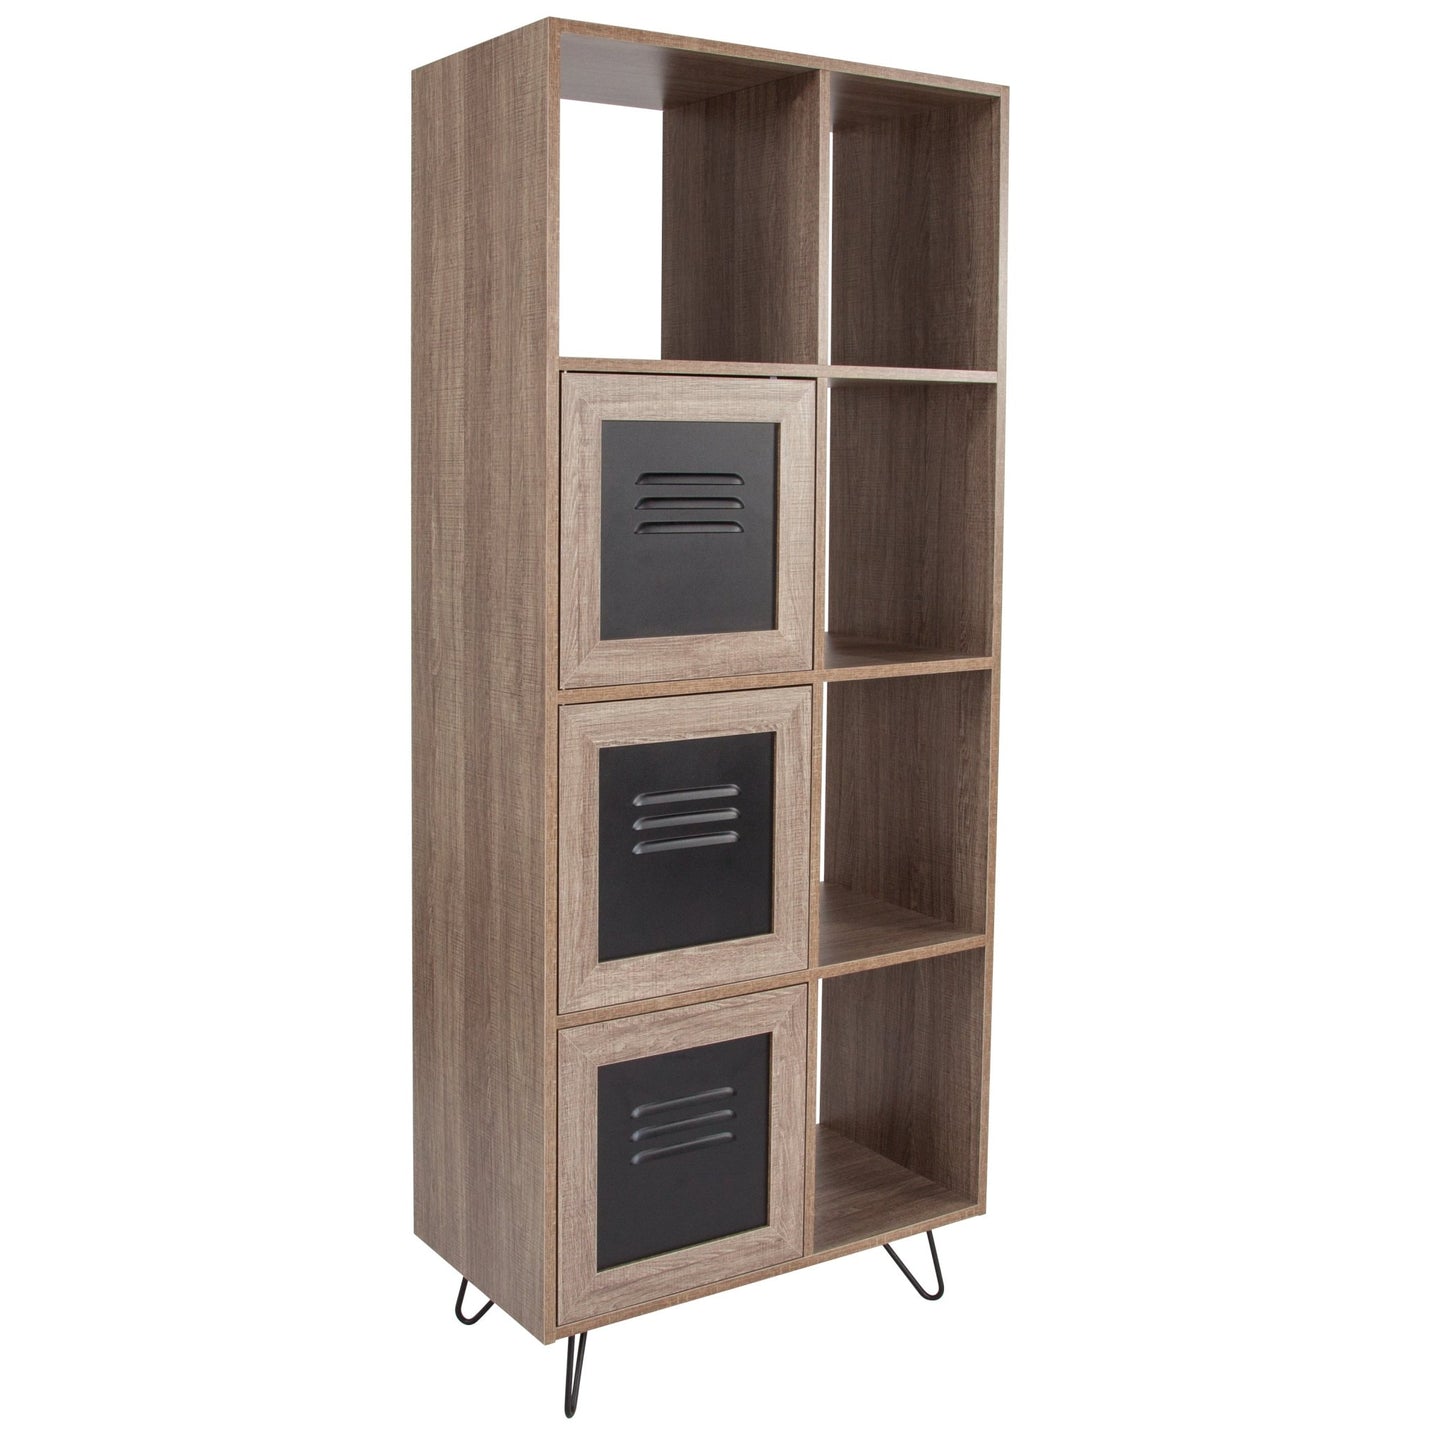 Woodridge Collection 63"H 5 Cube Storage Organizer Bookcase with Metal Cabinet Doors in Rustic Wood Grain Finish - SchoolOutlet